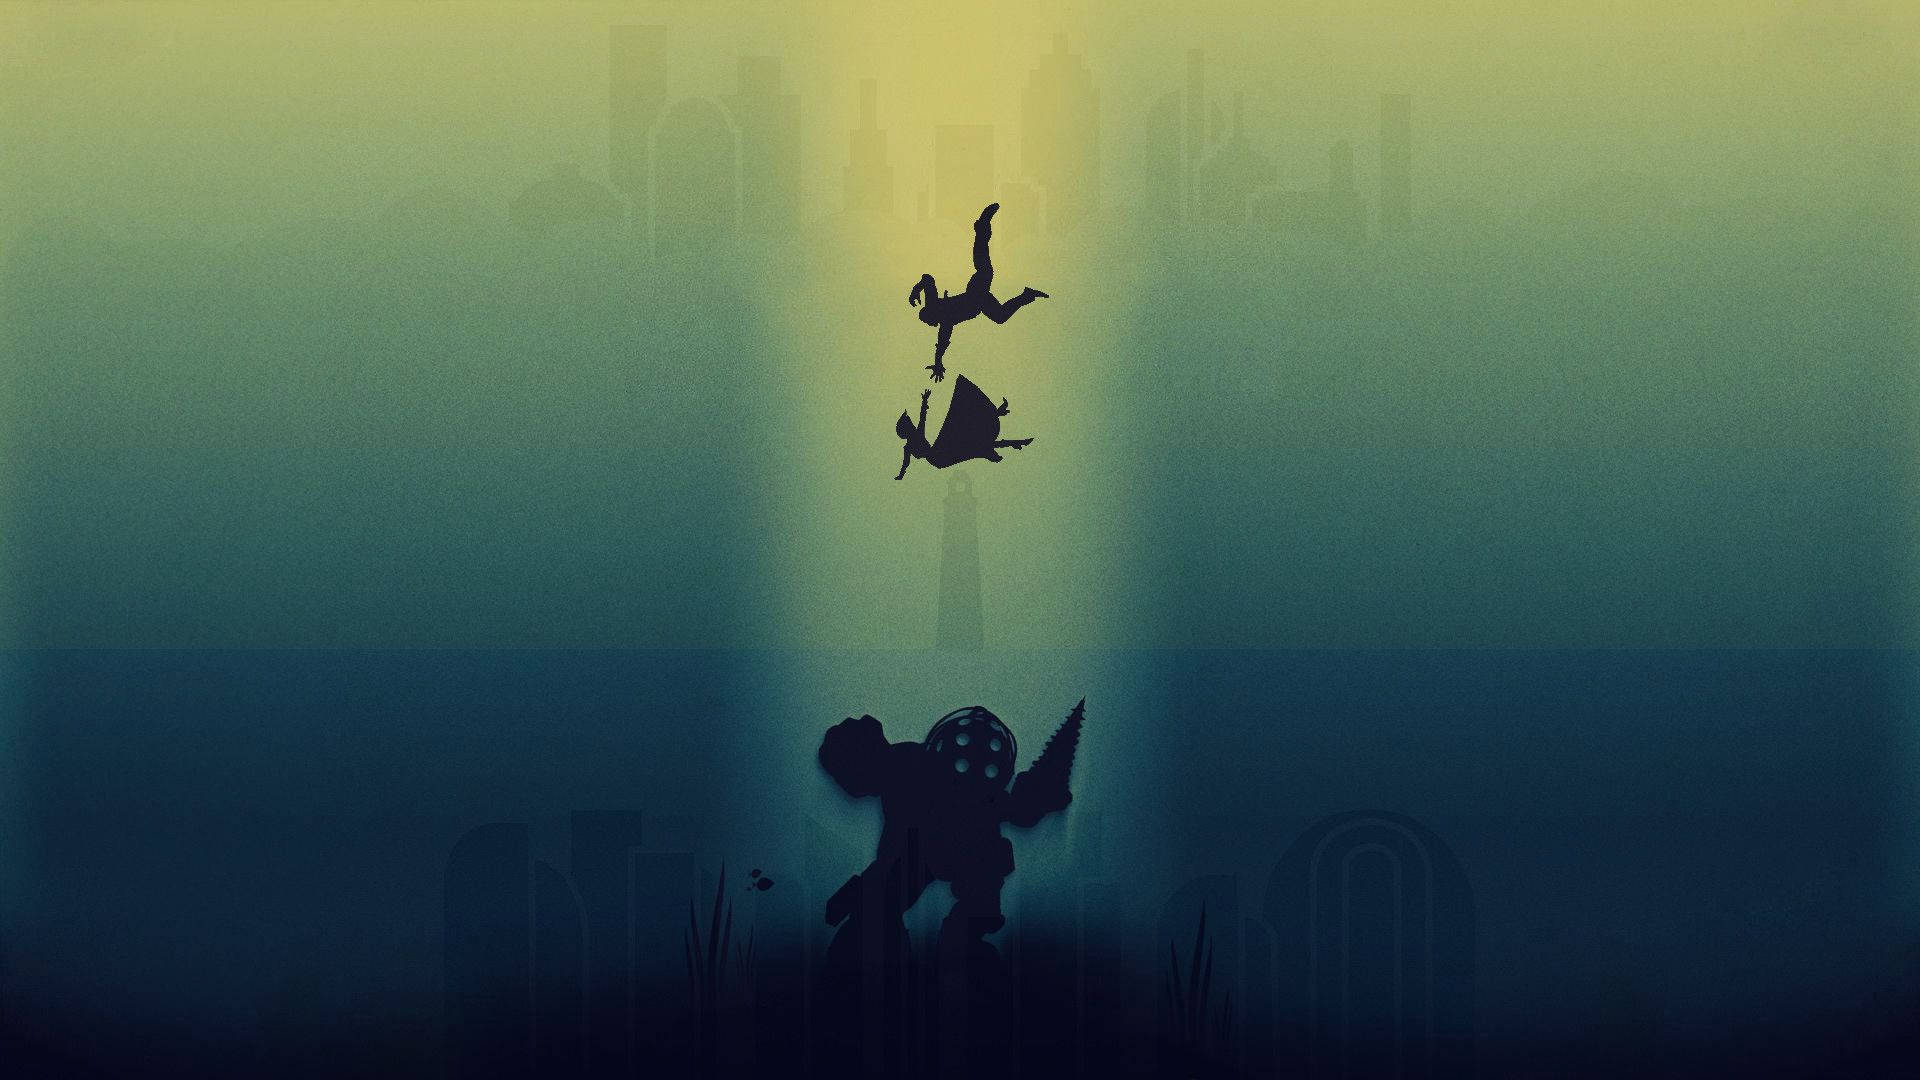 Bioshock 1920X1080 Wallpaper and Background Image